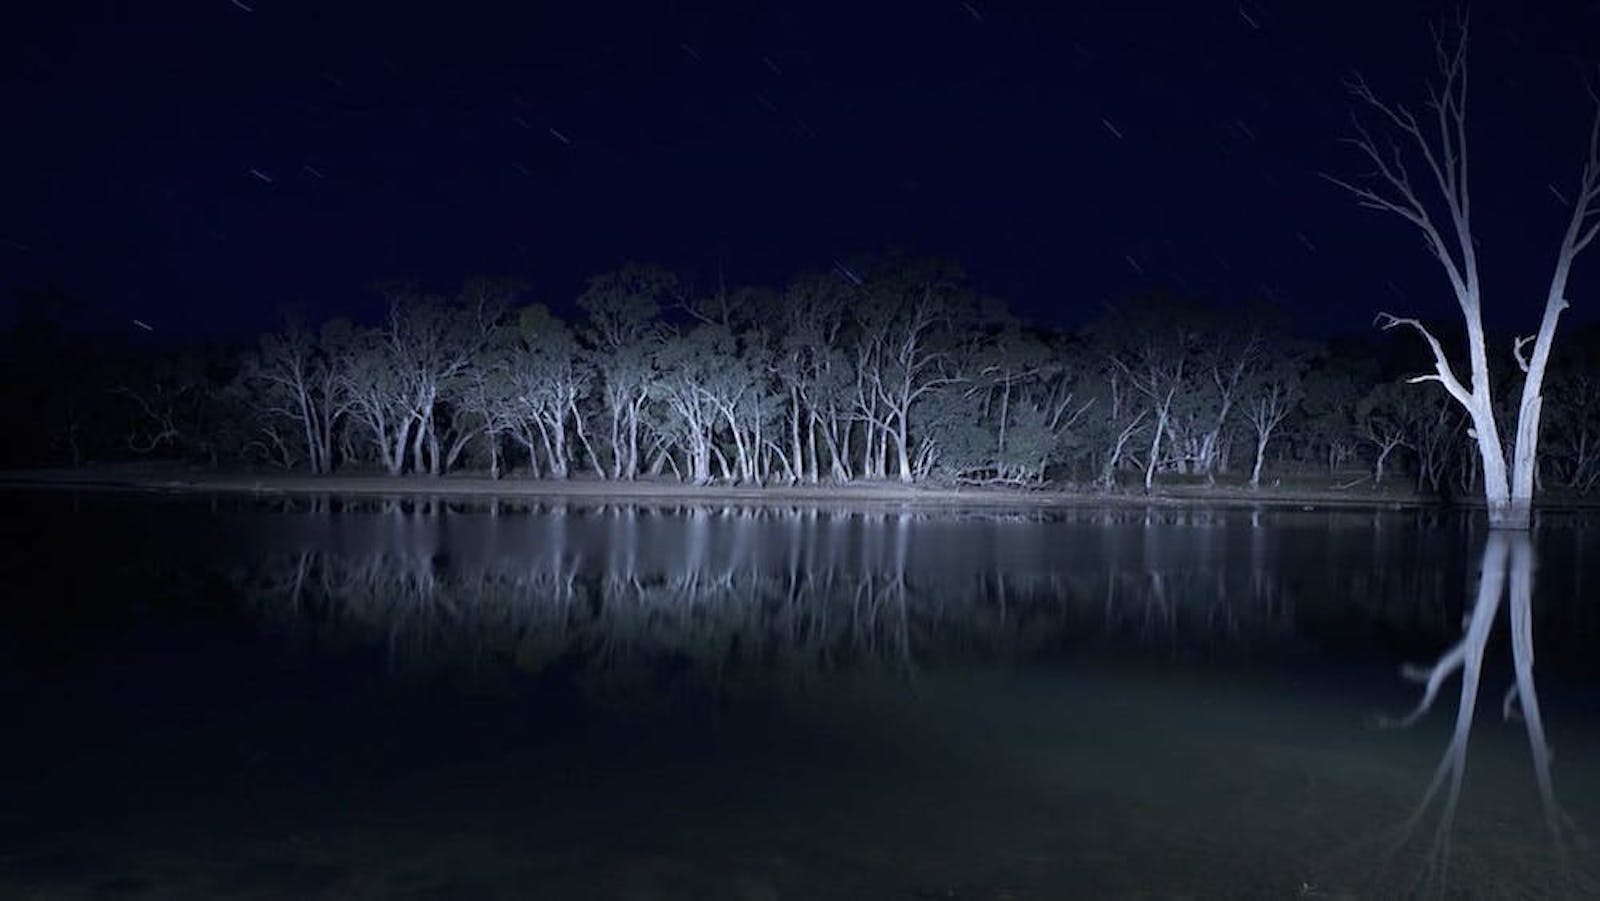 An image of an ominous lake and trees at night